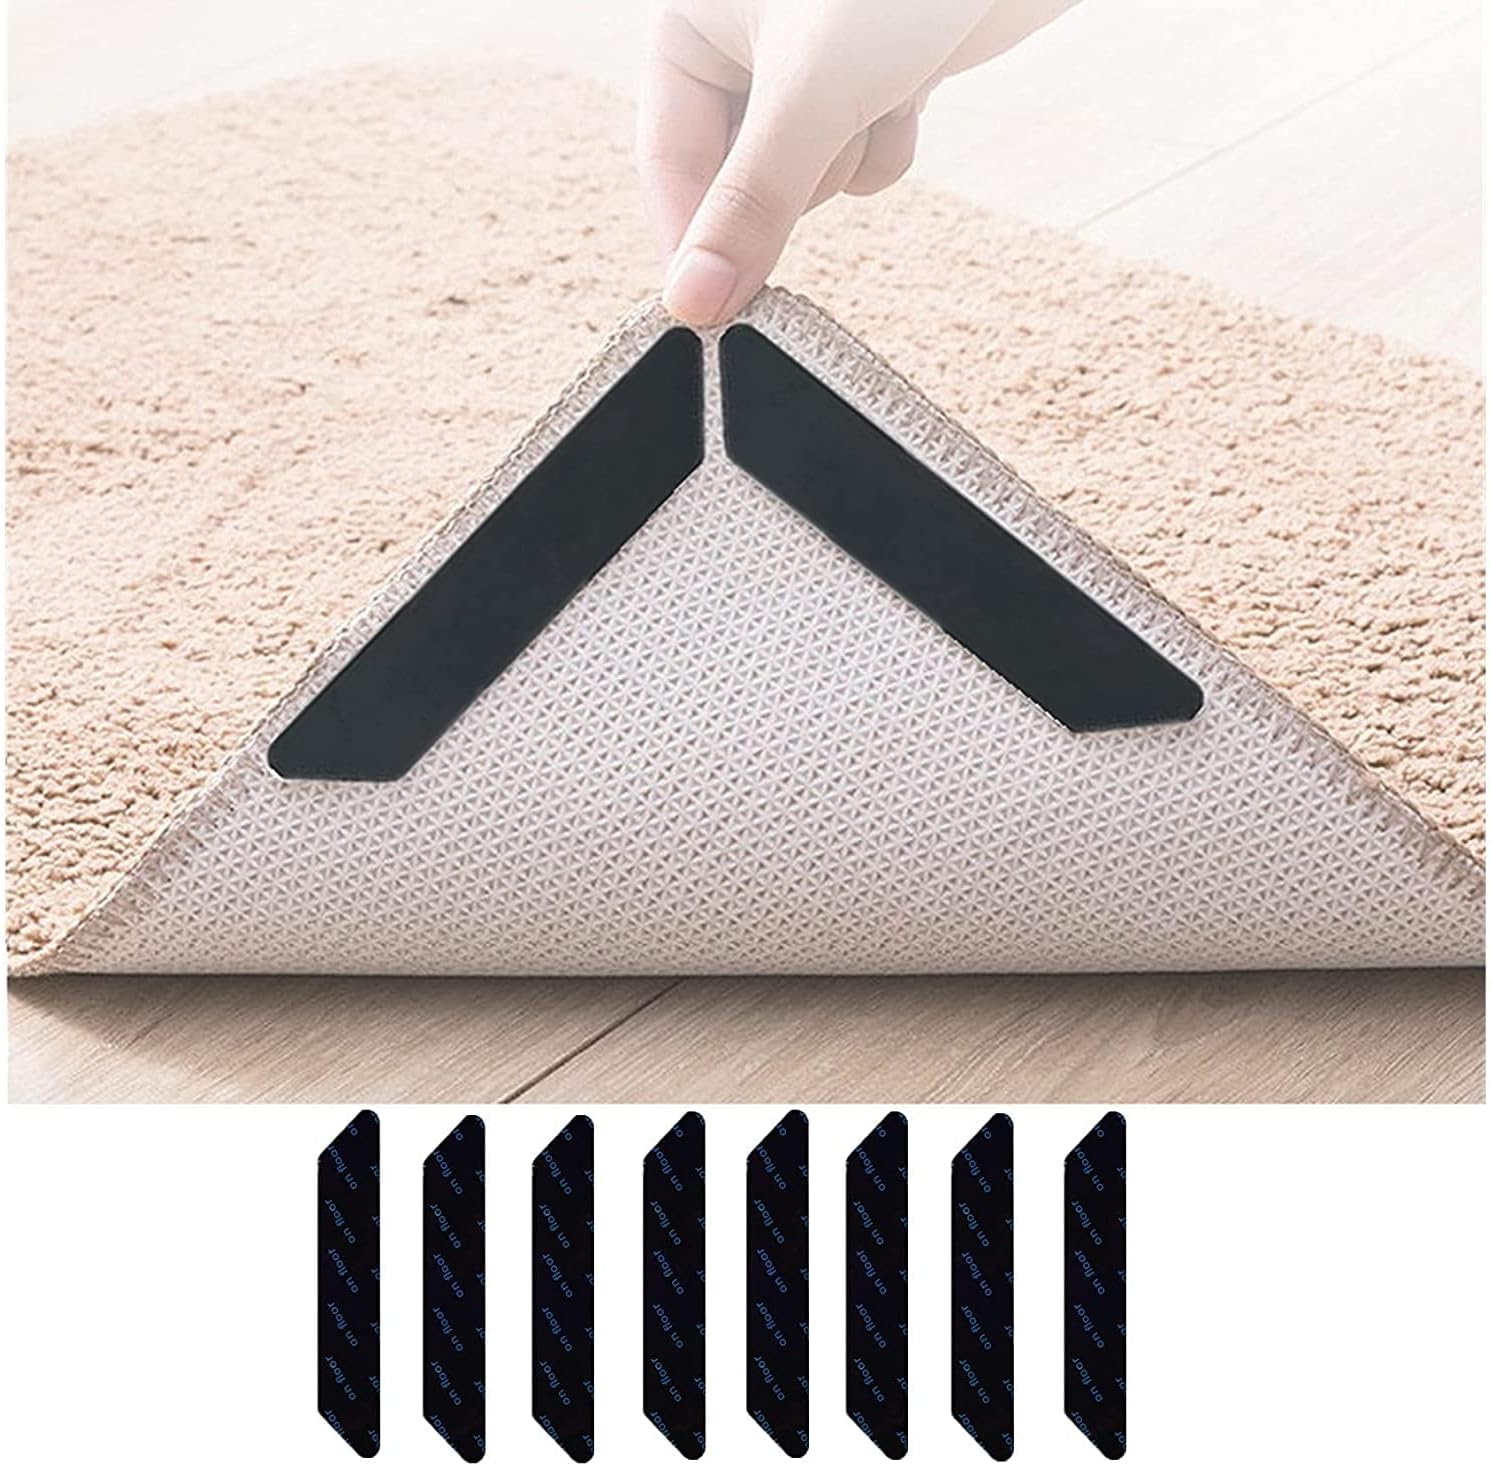 Yalixuan Rug Gripper,8 Pcs Rug Grippers for Area Rugs,Non Slip Rug Grippers for Hardwood Floors,Anti Slip Carpet Pads for Tile/Wood Floo